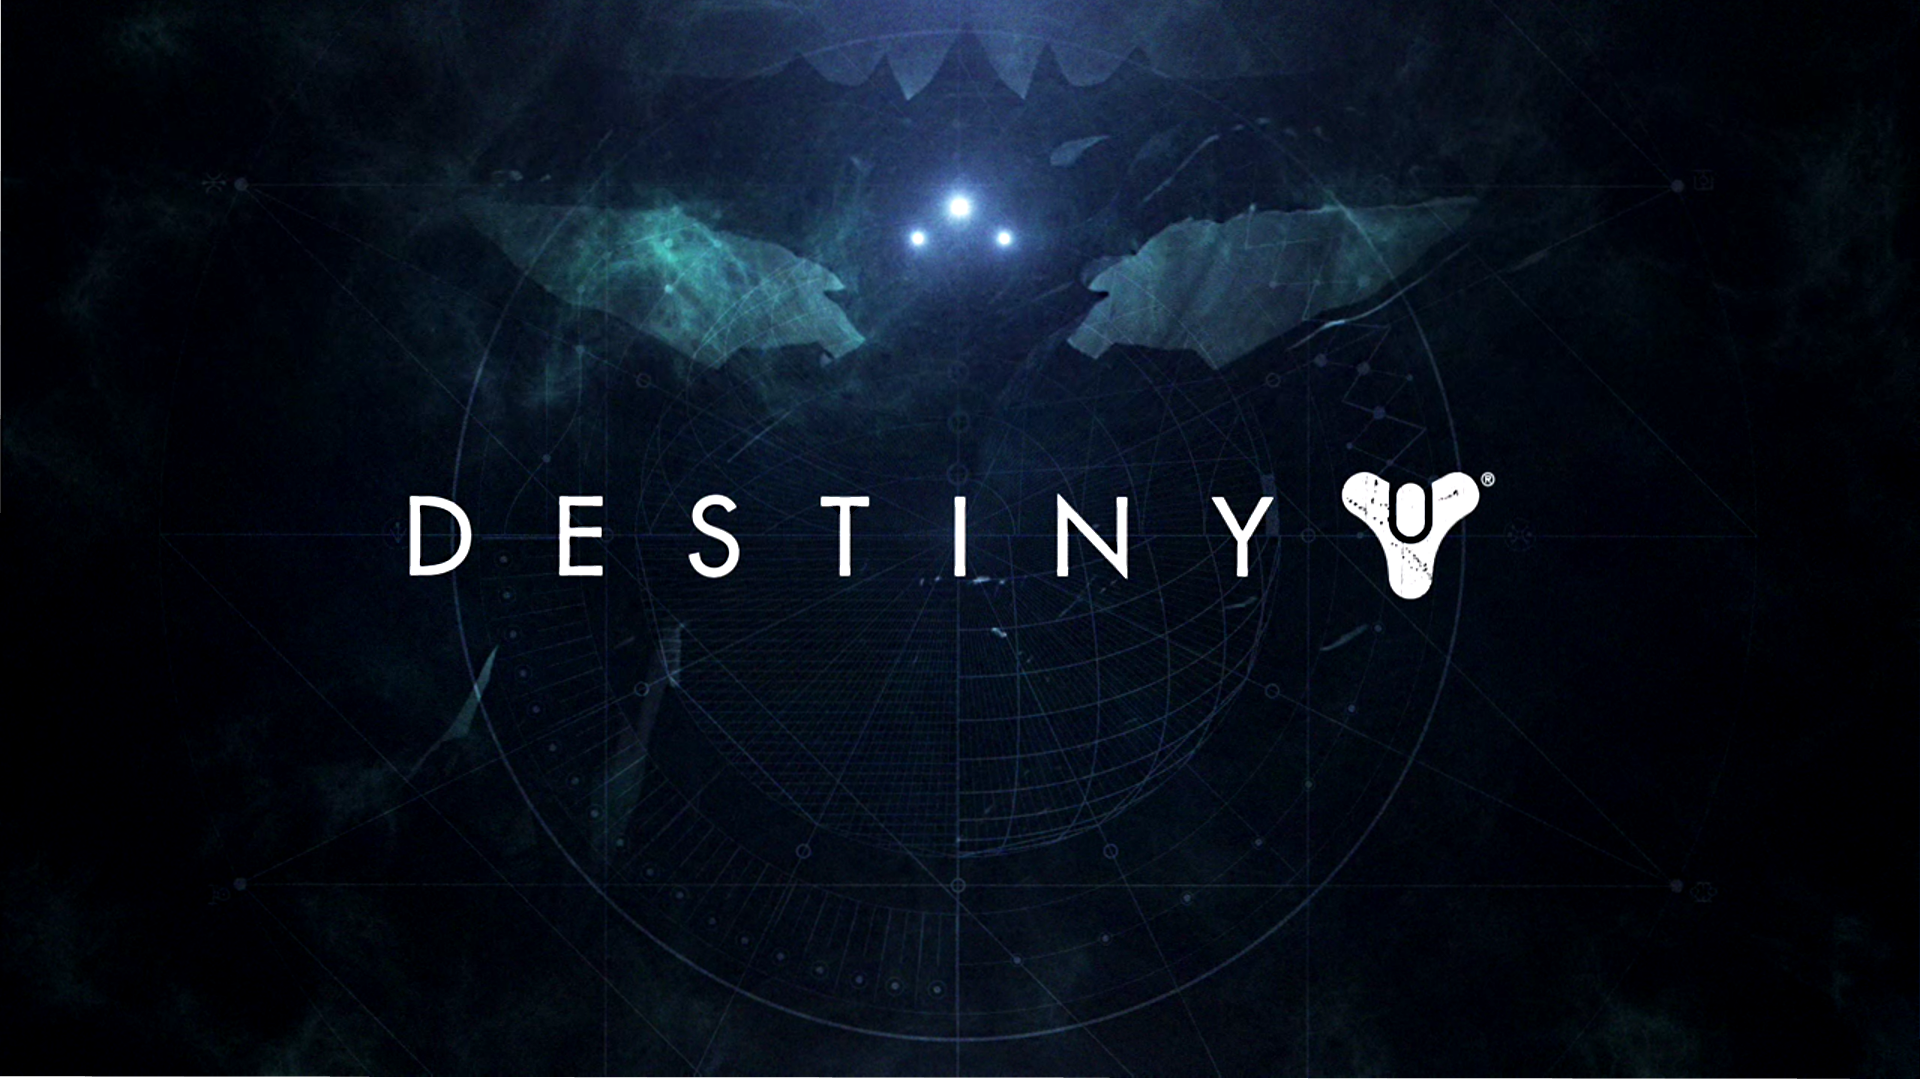  Destiny update is out I wanted to share this awesome wallpaper with